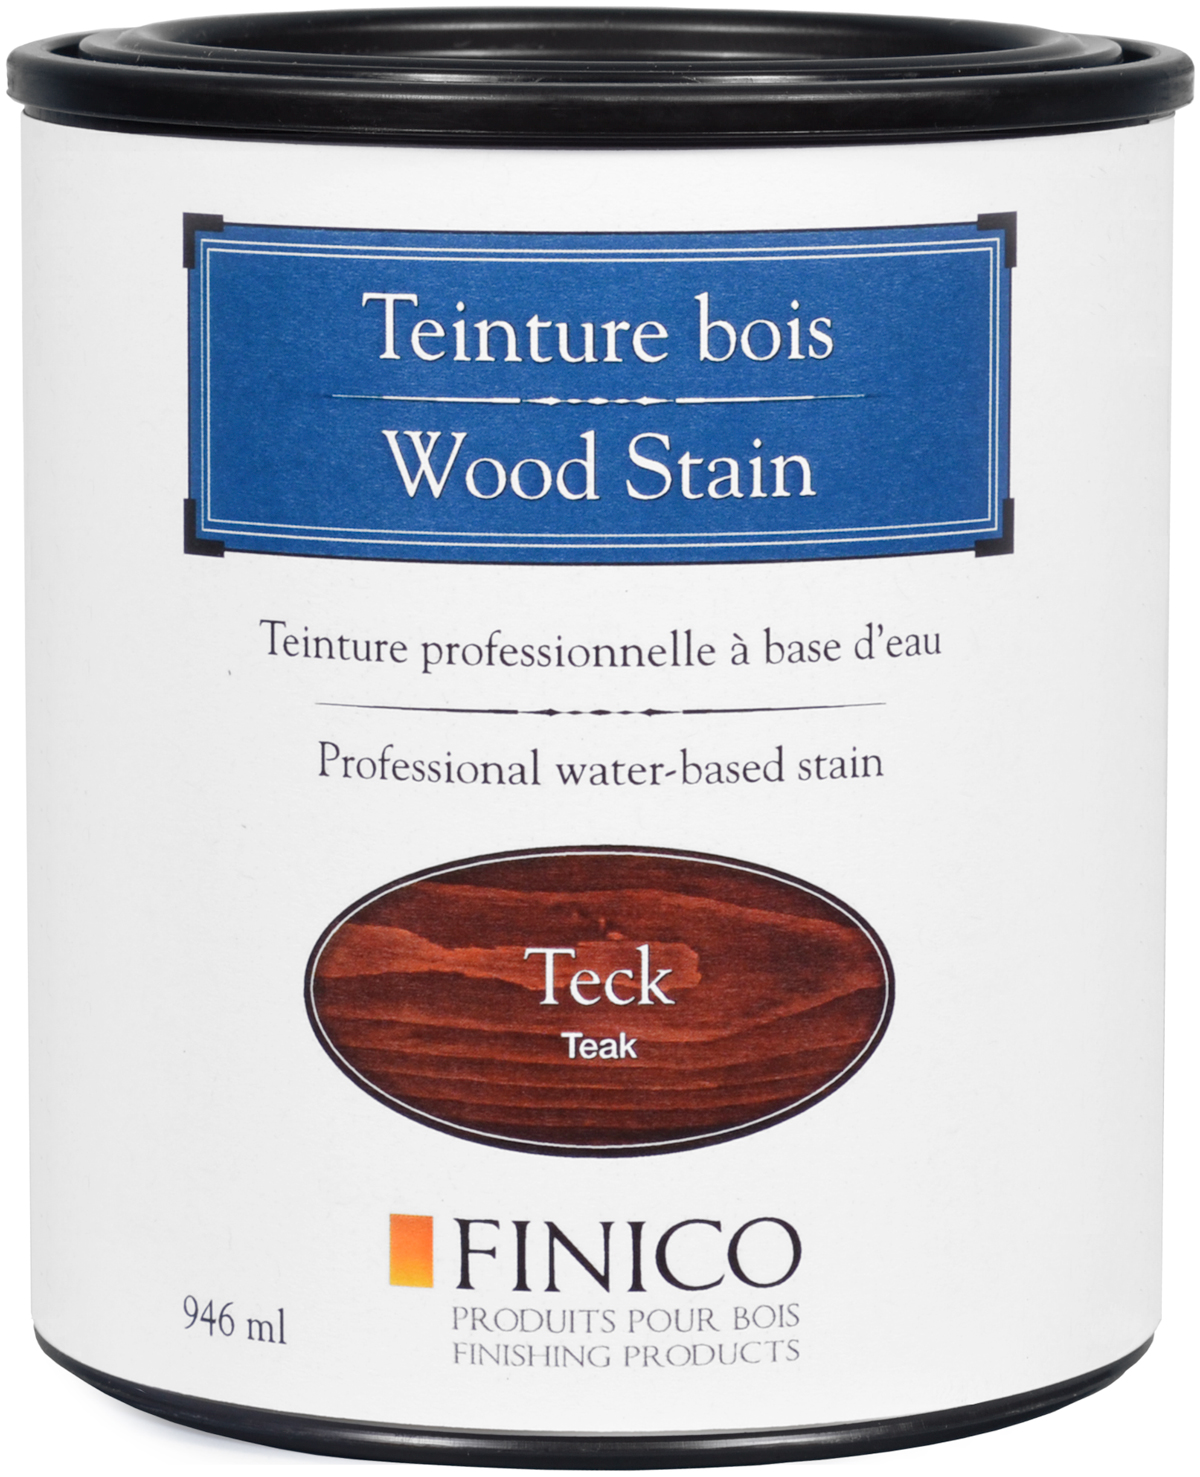 Wood Stain - Finico - Wood finishing products